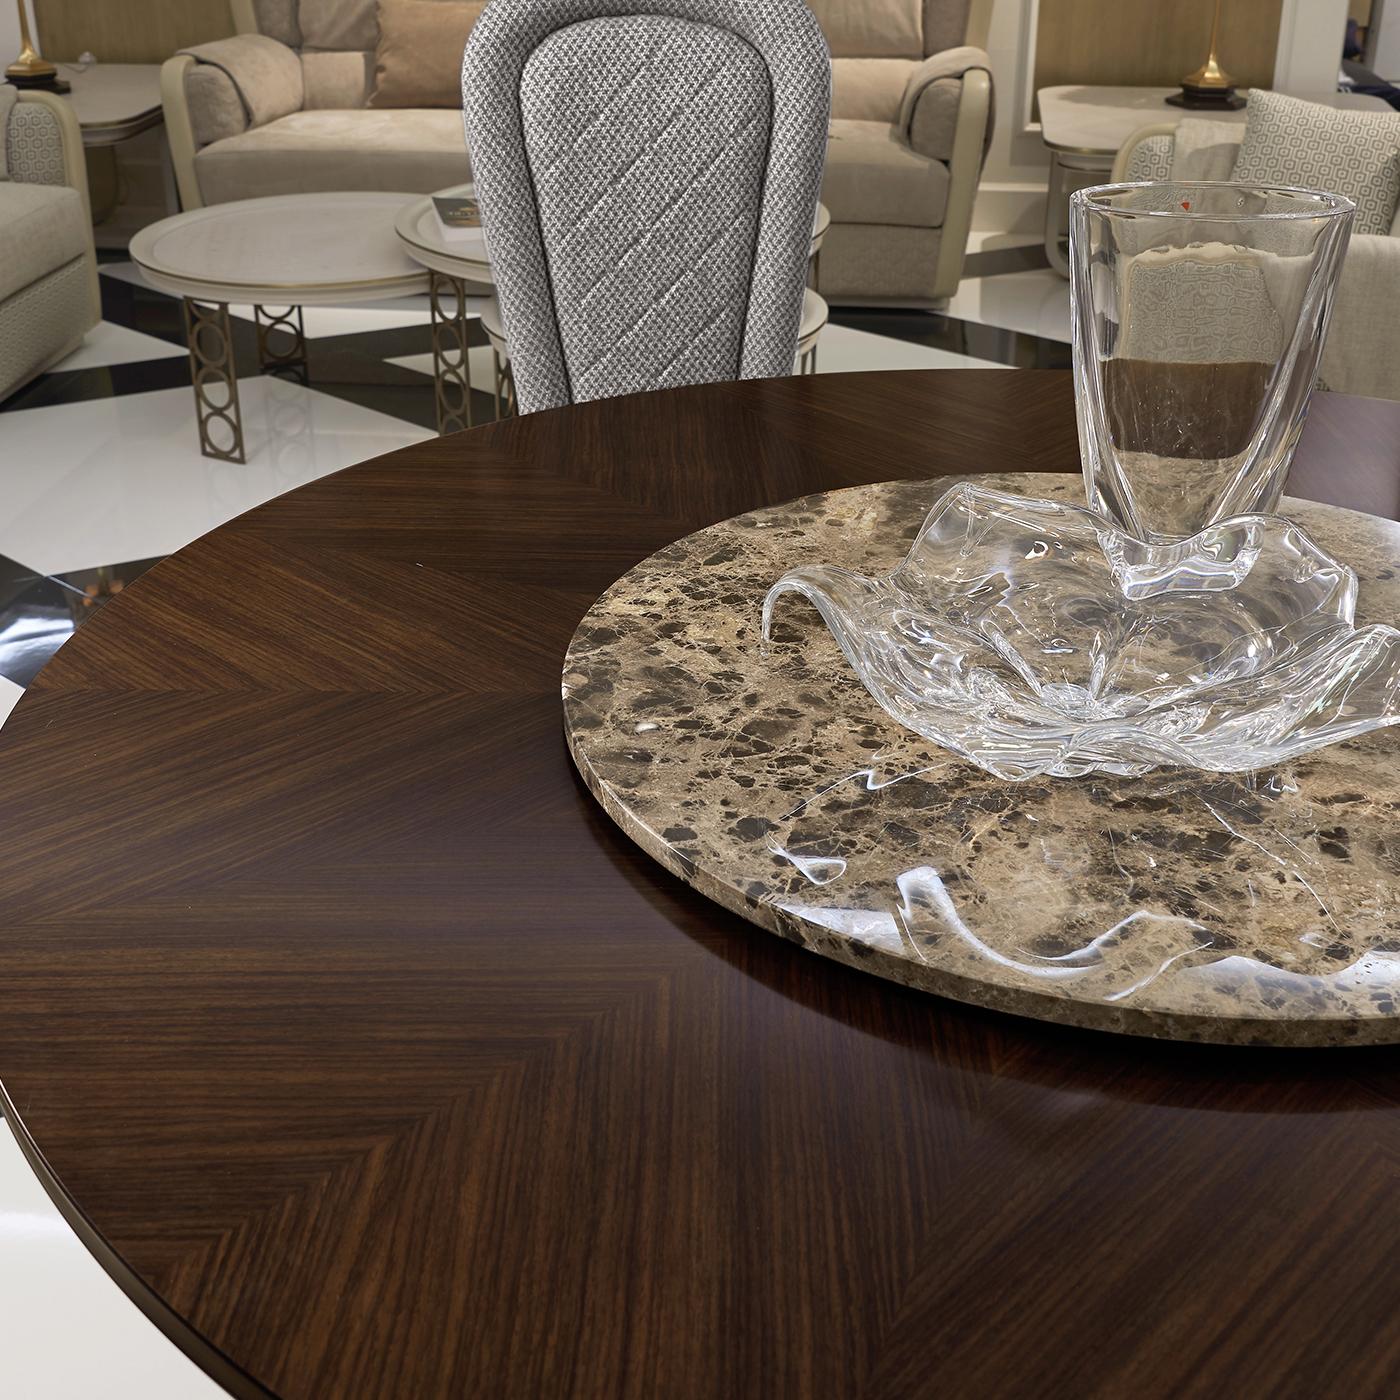 marble dining table with lazy susan